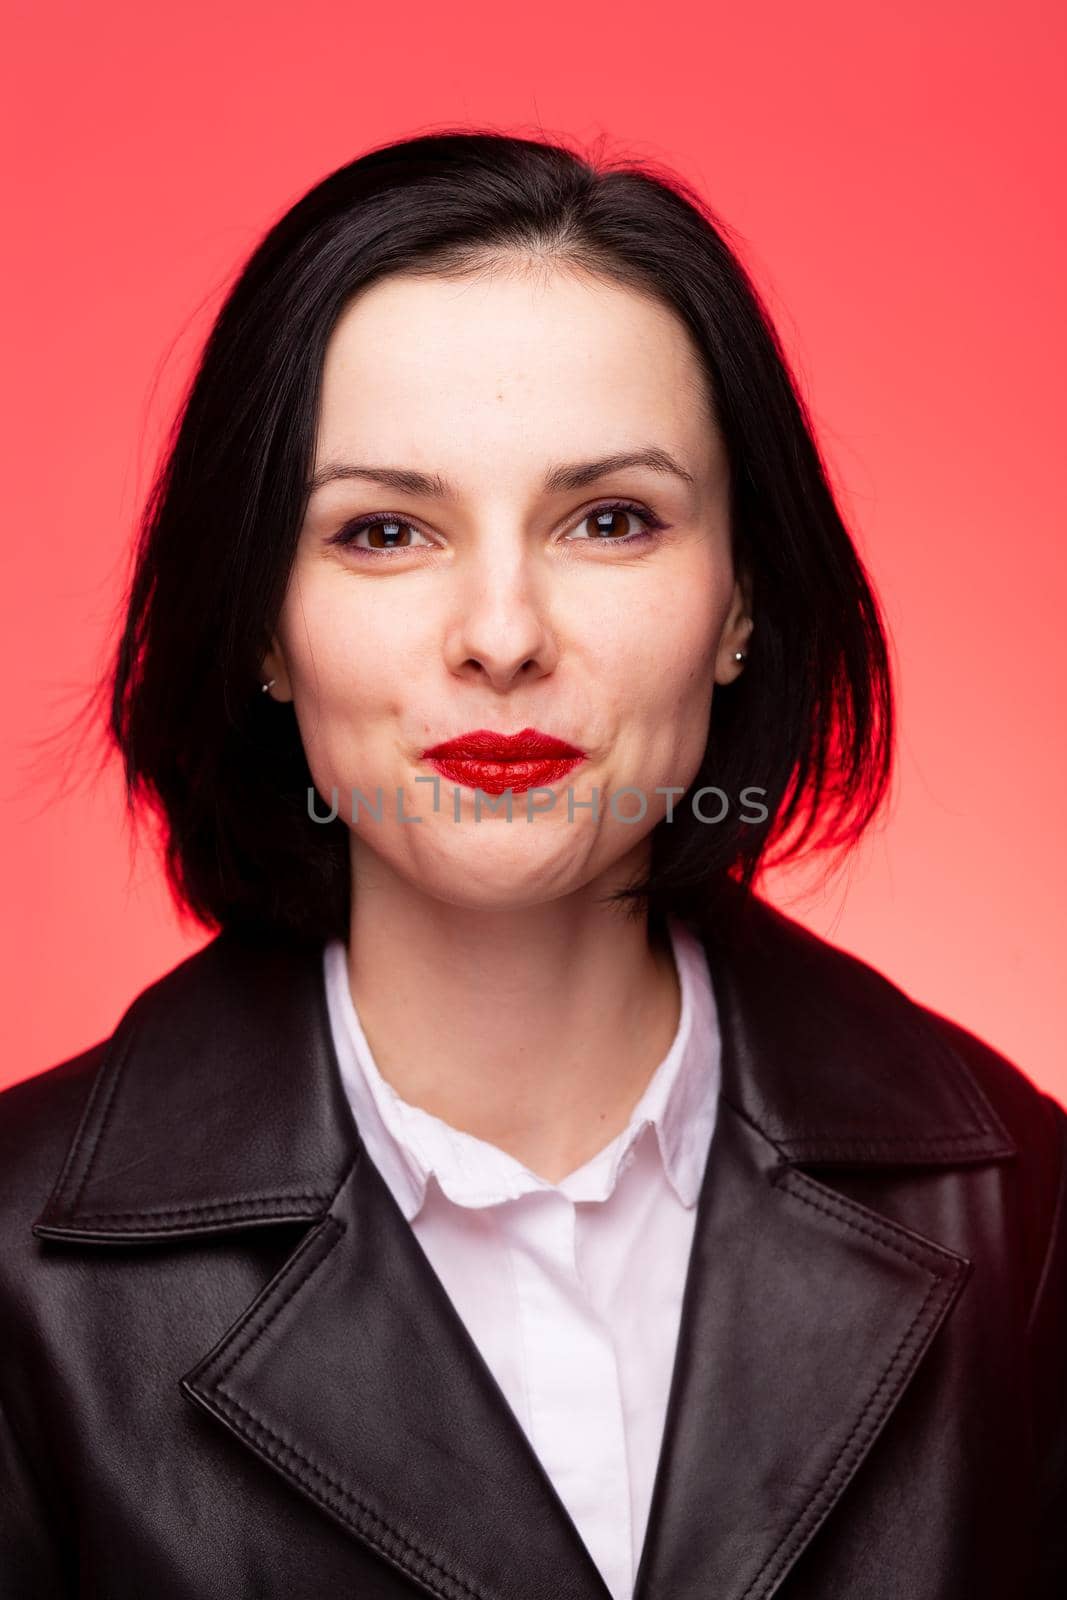 brunette woman with red lipstick on her lips in a black leather jacket and white shirt, red background. High quality photo